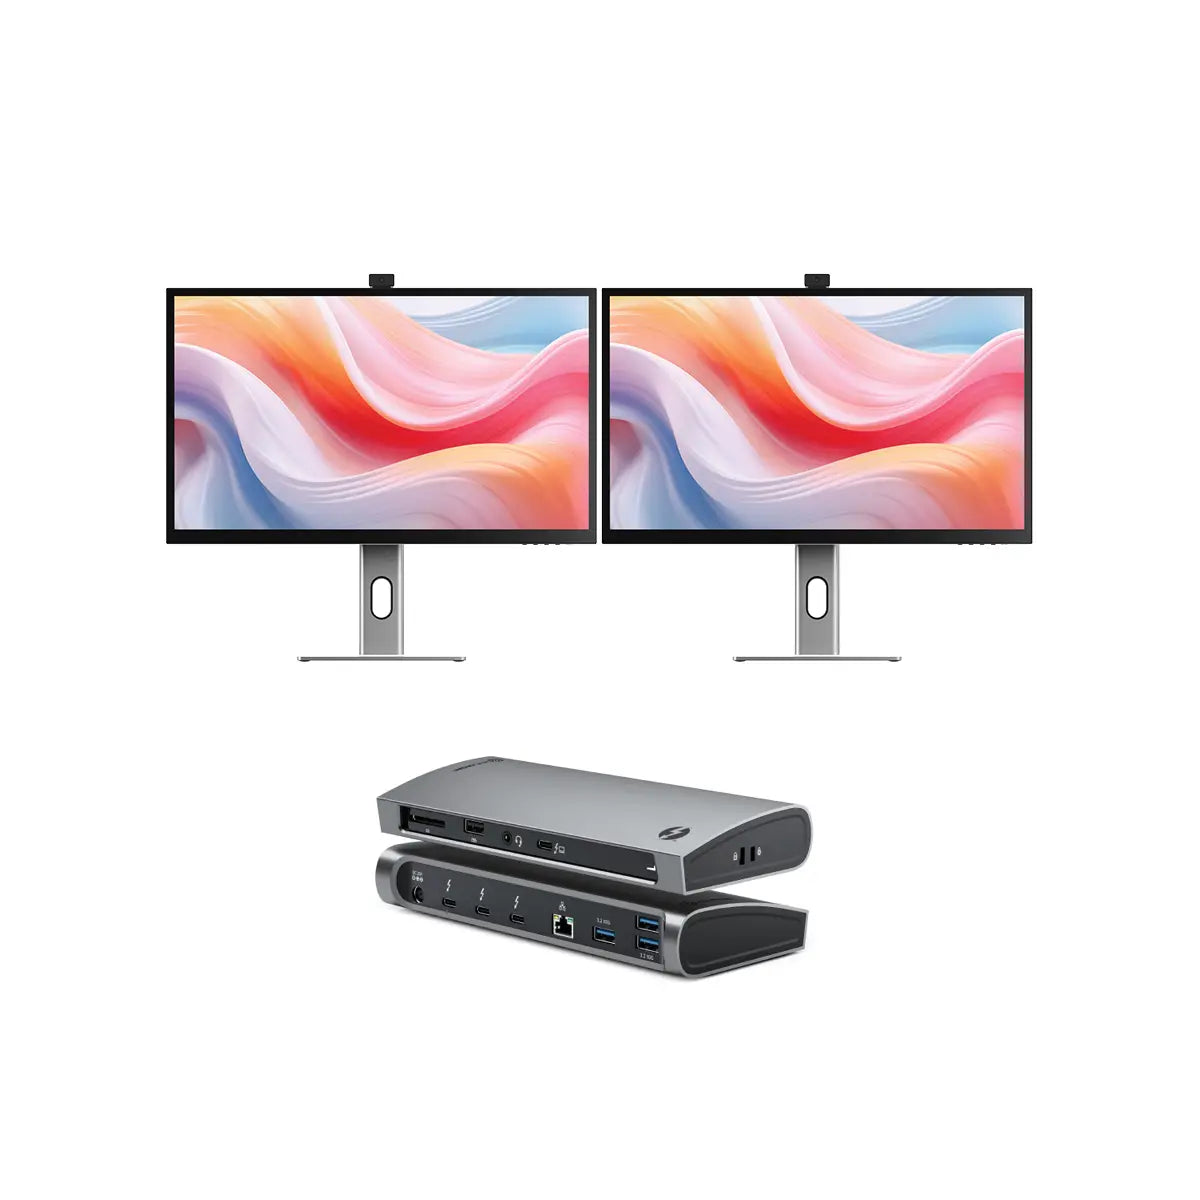 clarity-pro-27-uhd-4k-monitor-with-65w-pd-and-webcam-pack-of-2-thunderbolt-4-blaze-docking-station_1